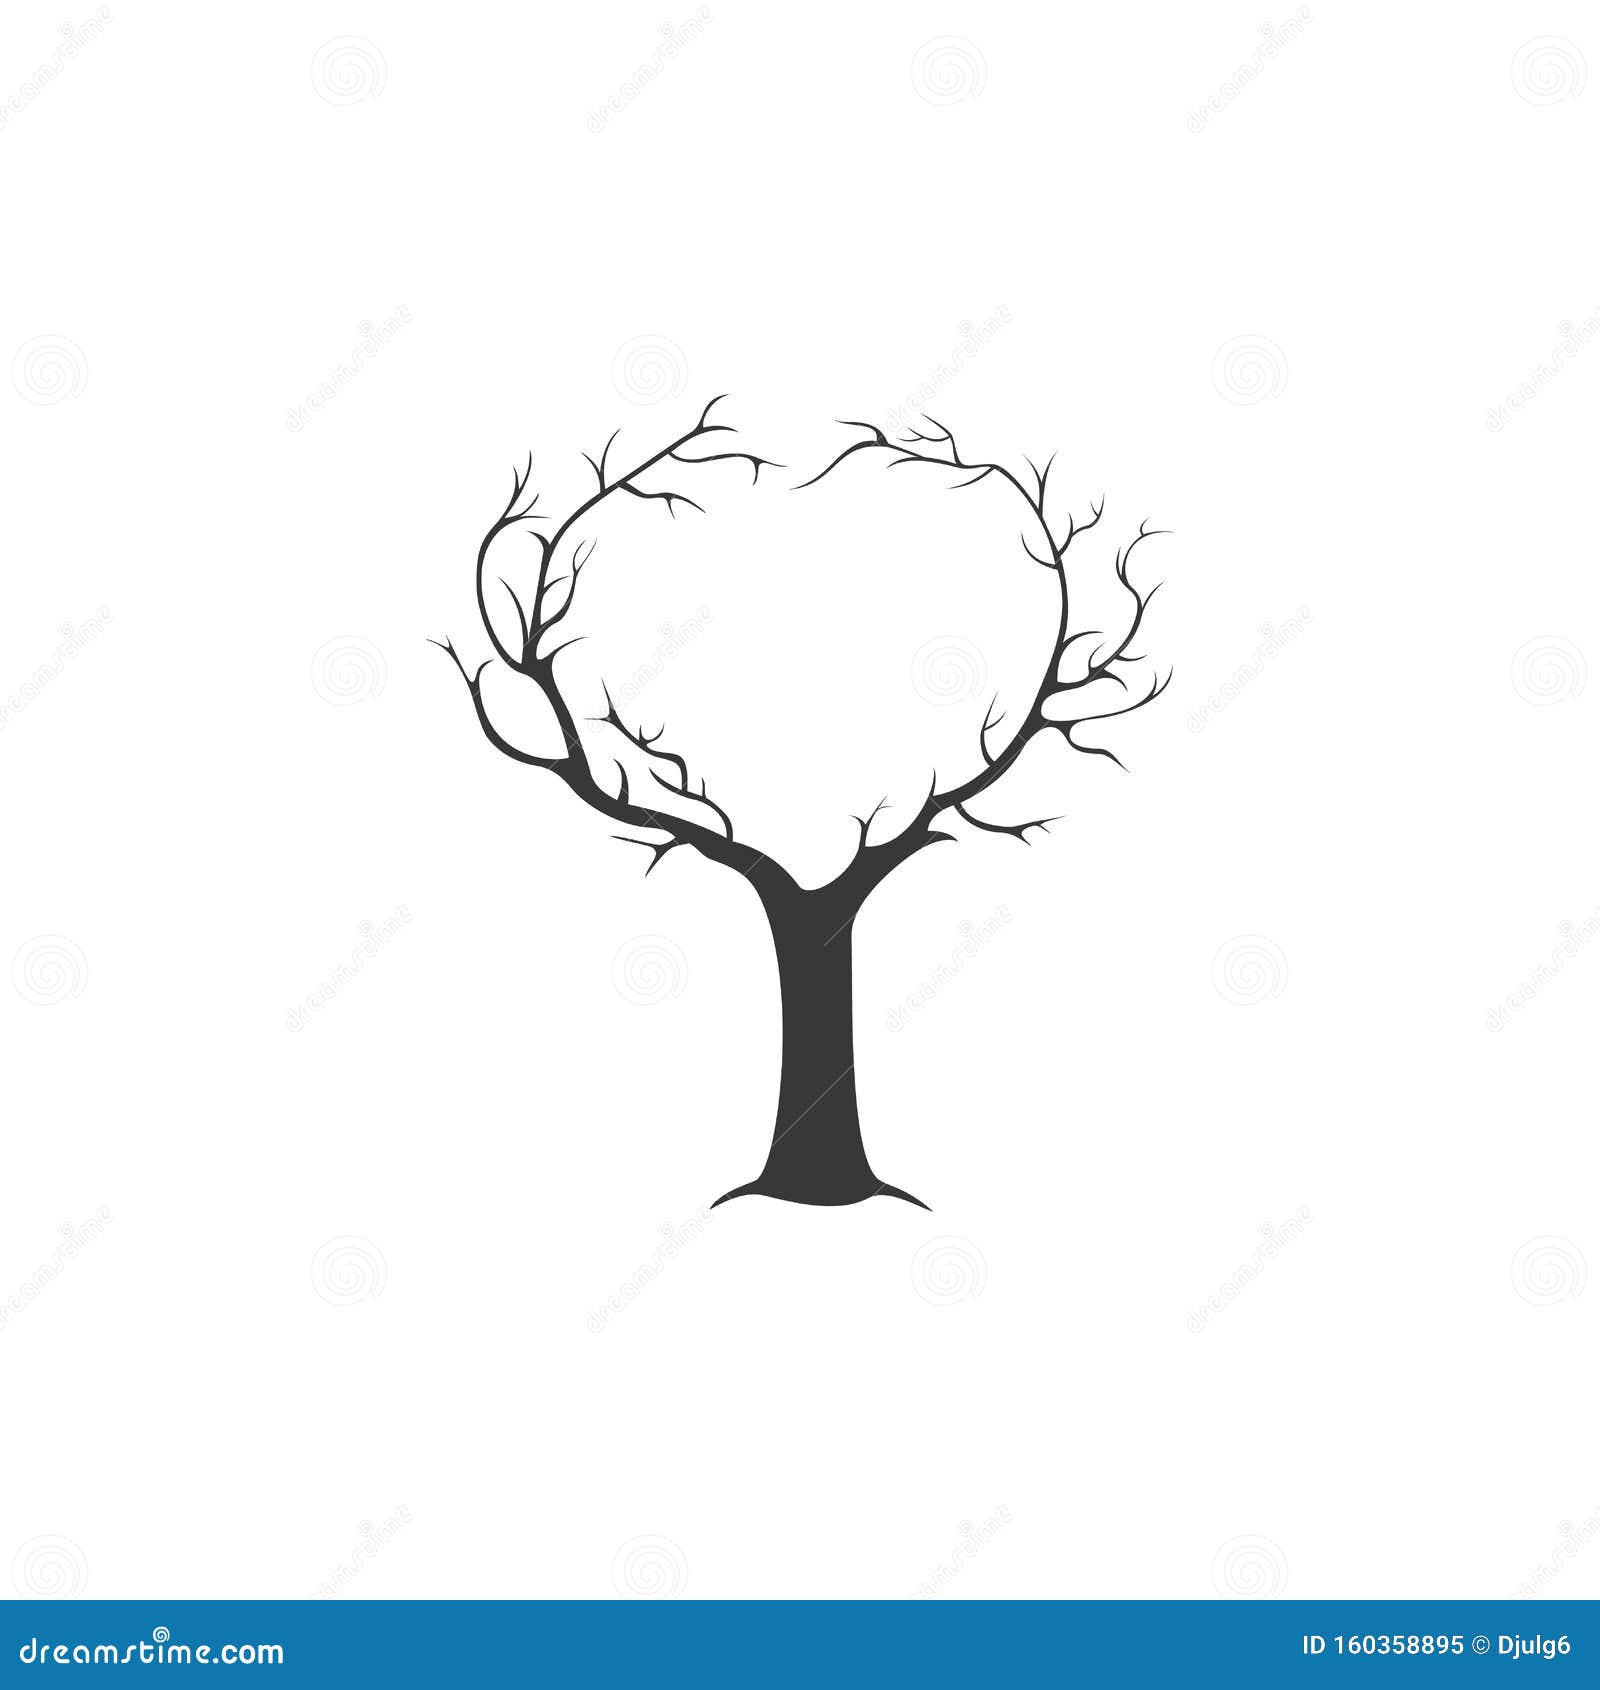 Download Love-tree - Hand Drawn Illustration. Love Tree With Heart ...